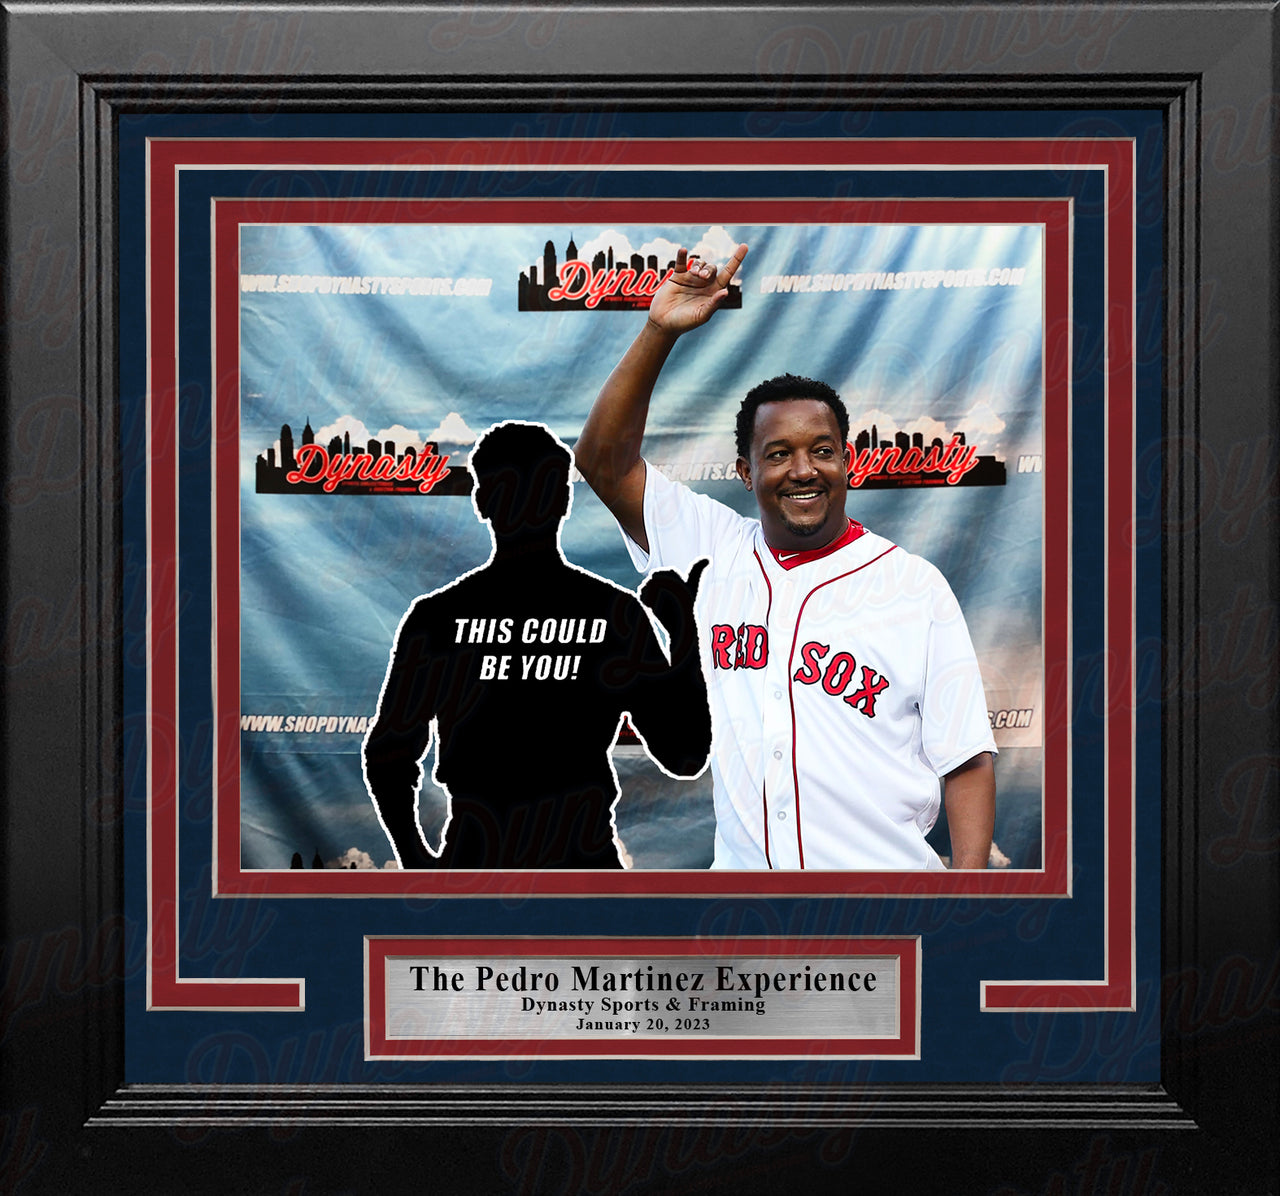 Pedro Martinez Boston Red Sox Photo-Op Frame Kit with Commemorative Nameplate - Dynasty Sports & Framing 